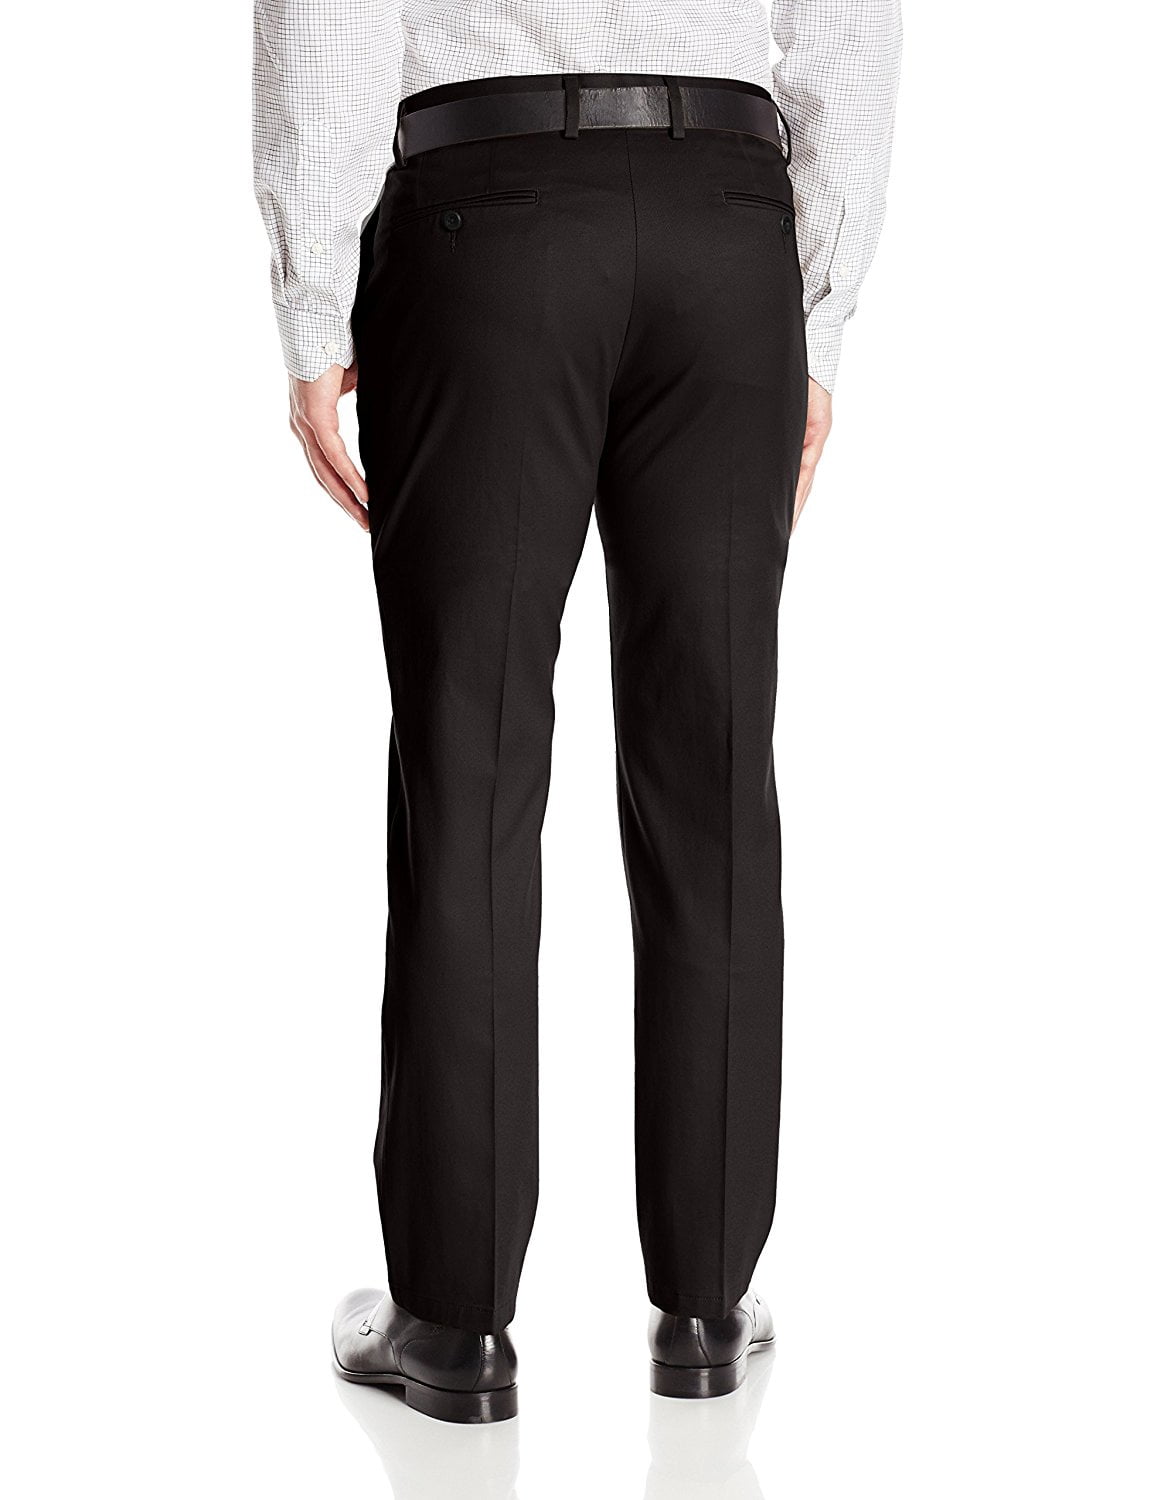 Golftini | Black Checkered Stretch Ankle Pant | Women's Golf Pant